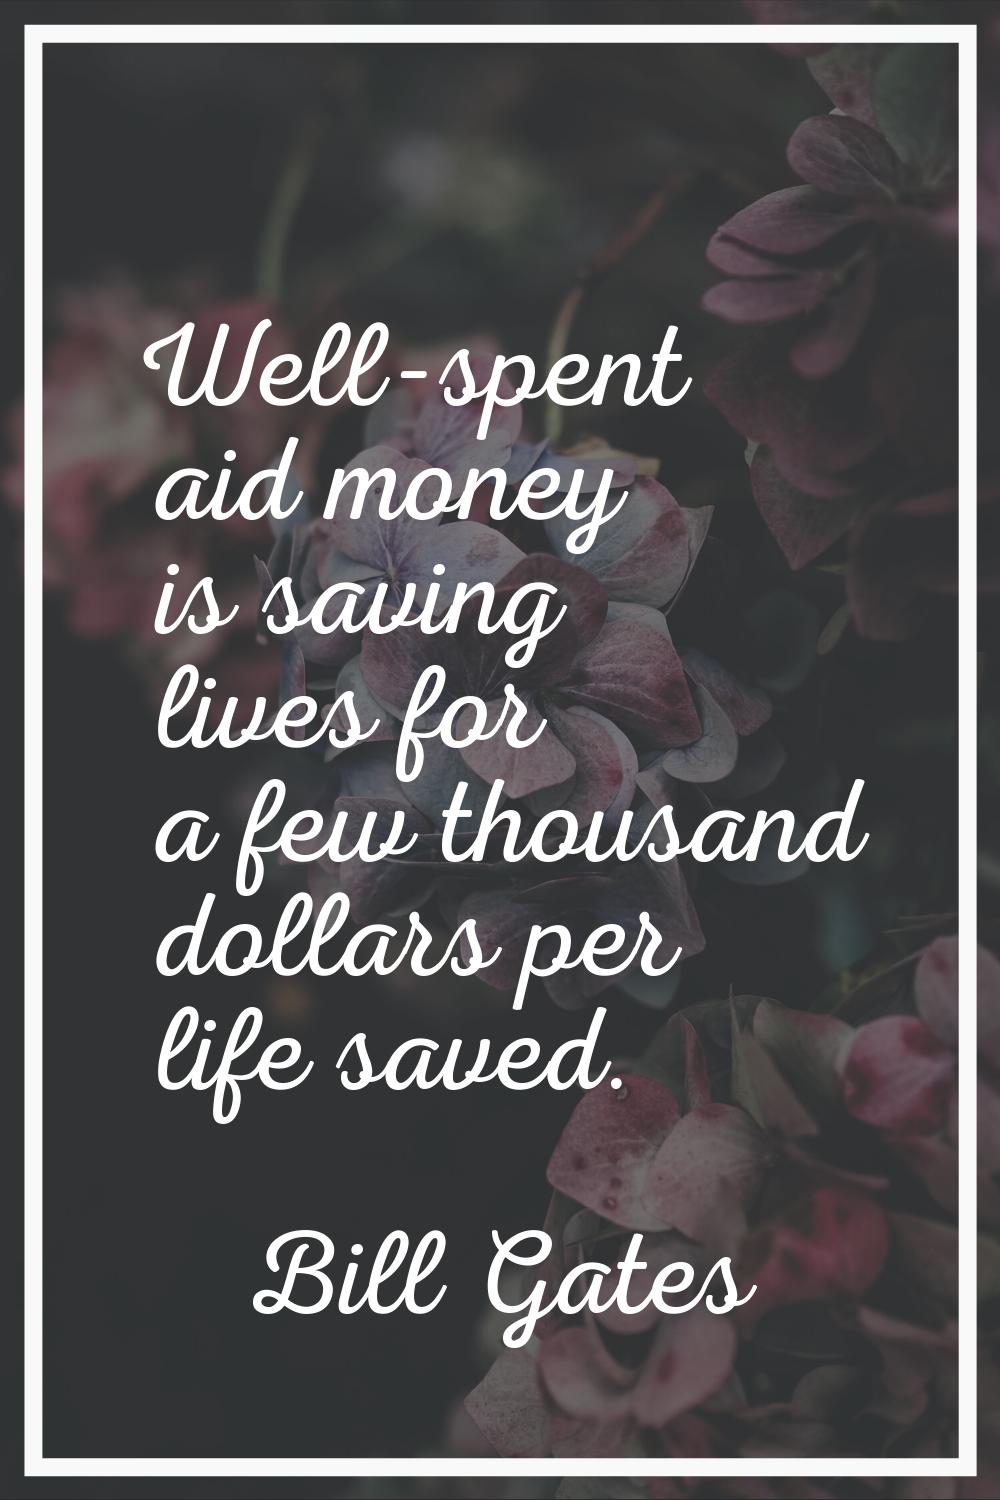 Well-spent aid money is saving lives for a few thousand dollars per life saved.